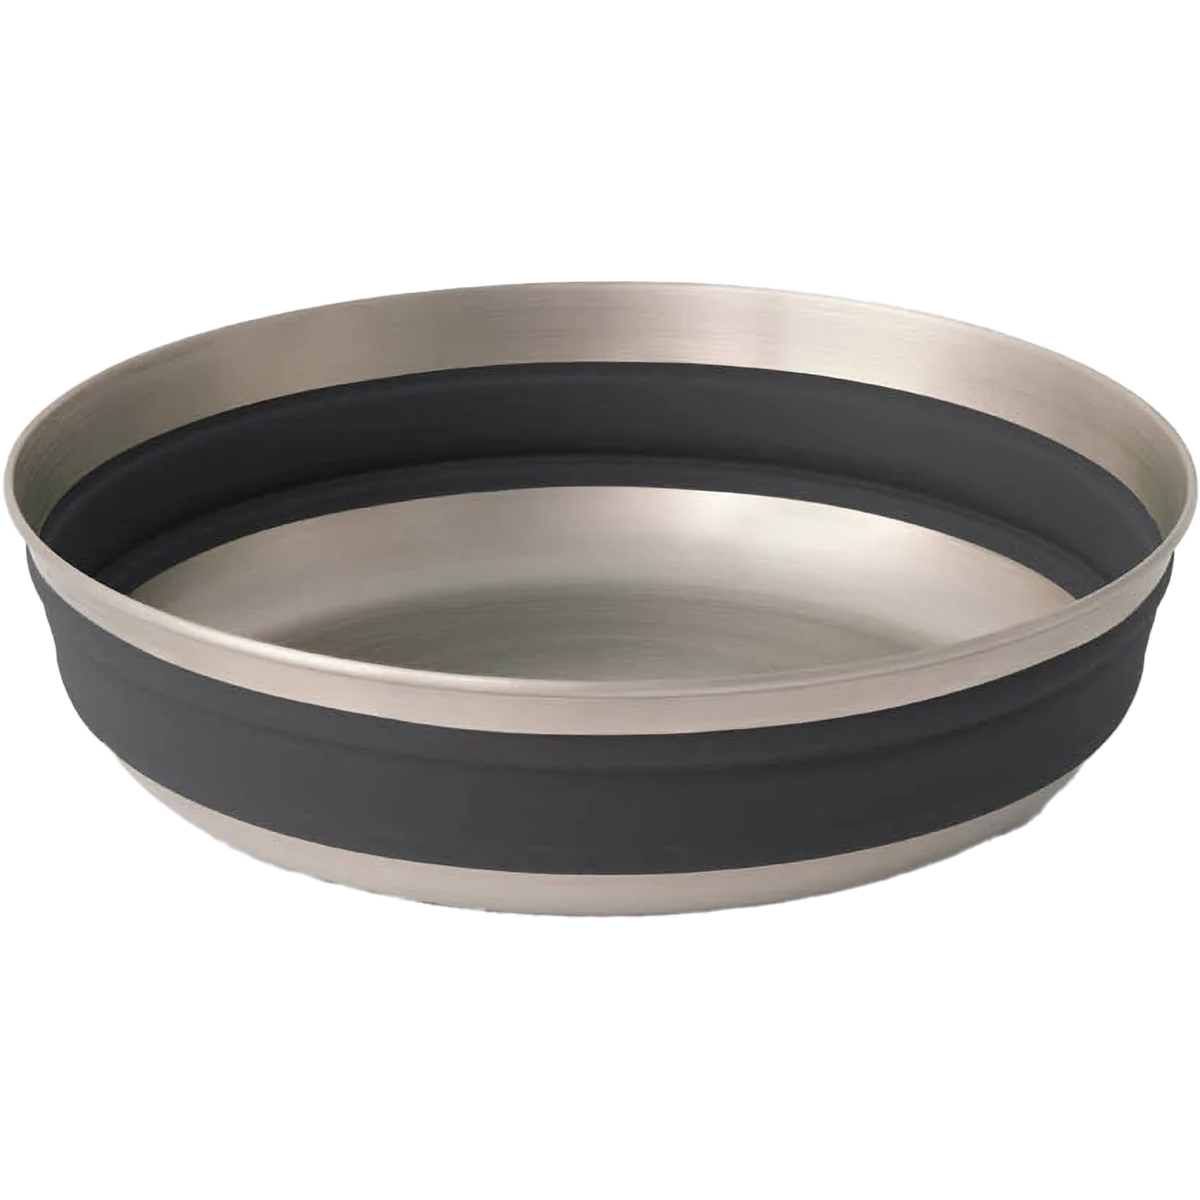 Detour Stainless Collapsible Bowl - Large alternate view